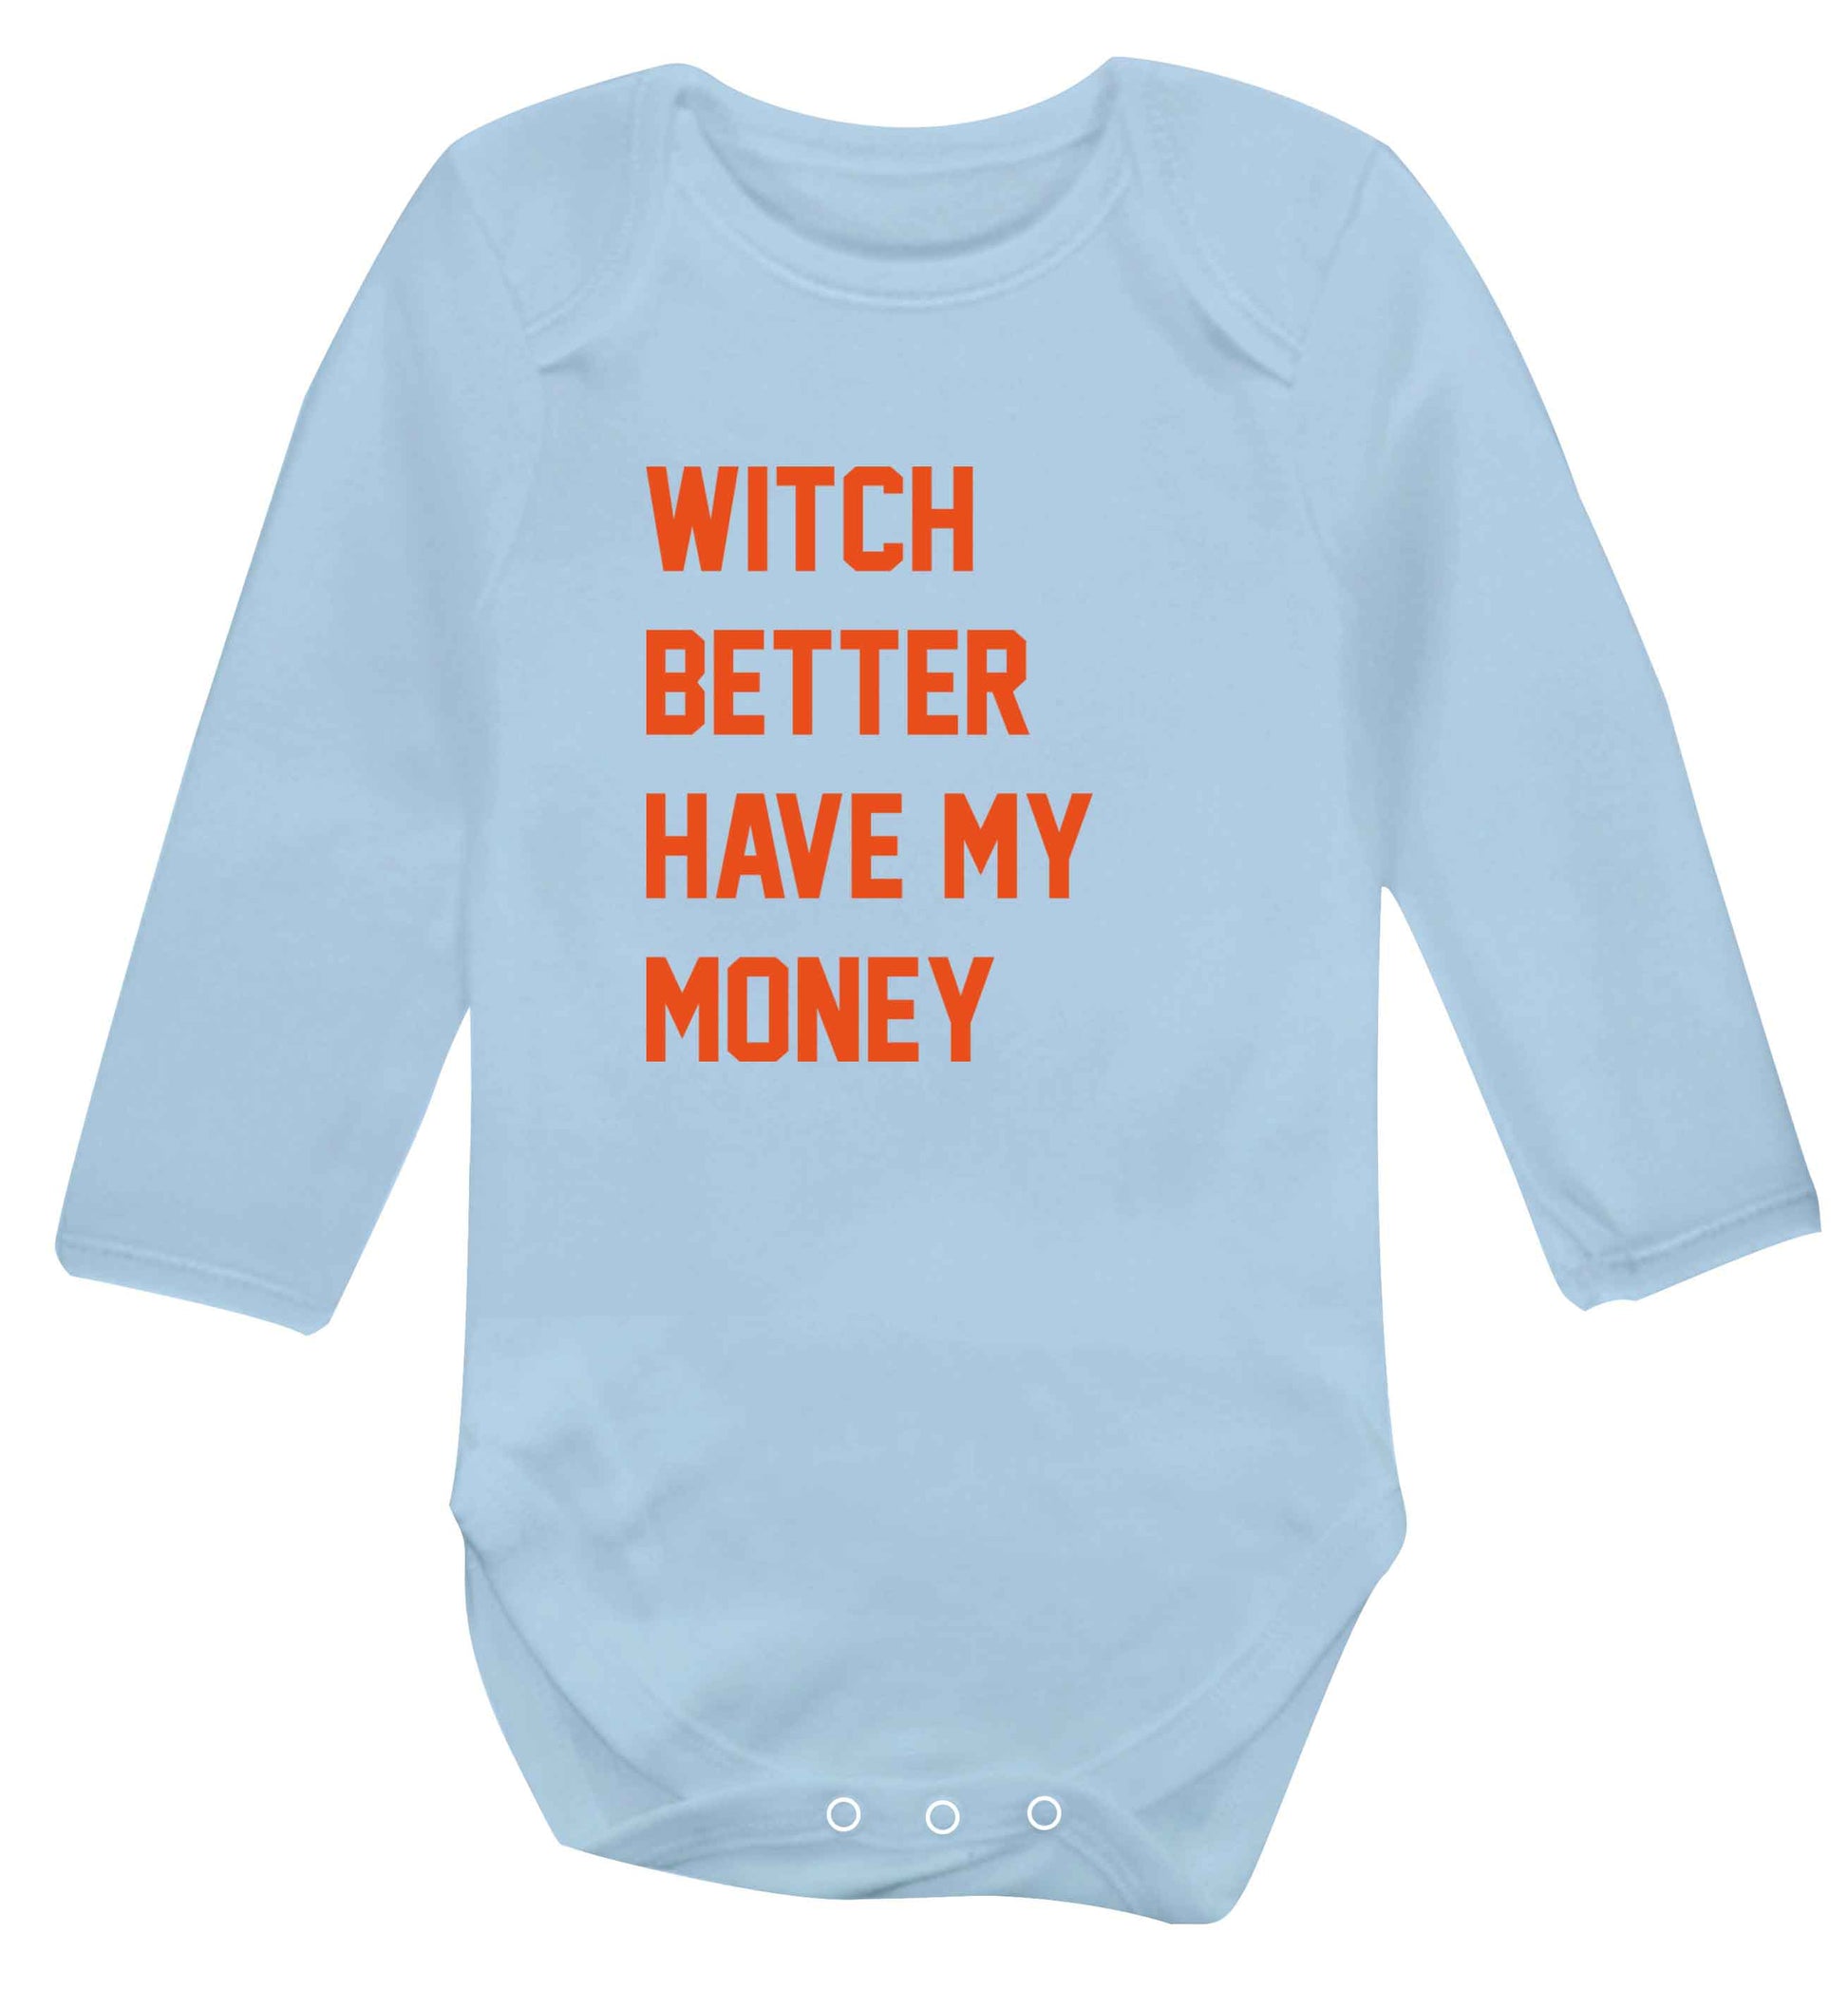 Witch better have my money baby vest long sleeved pale blue 6-12 months